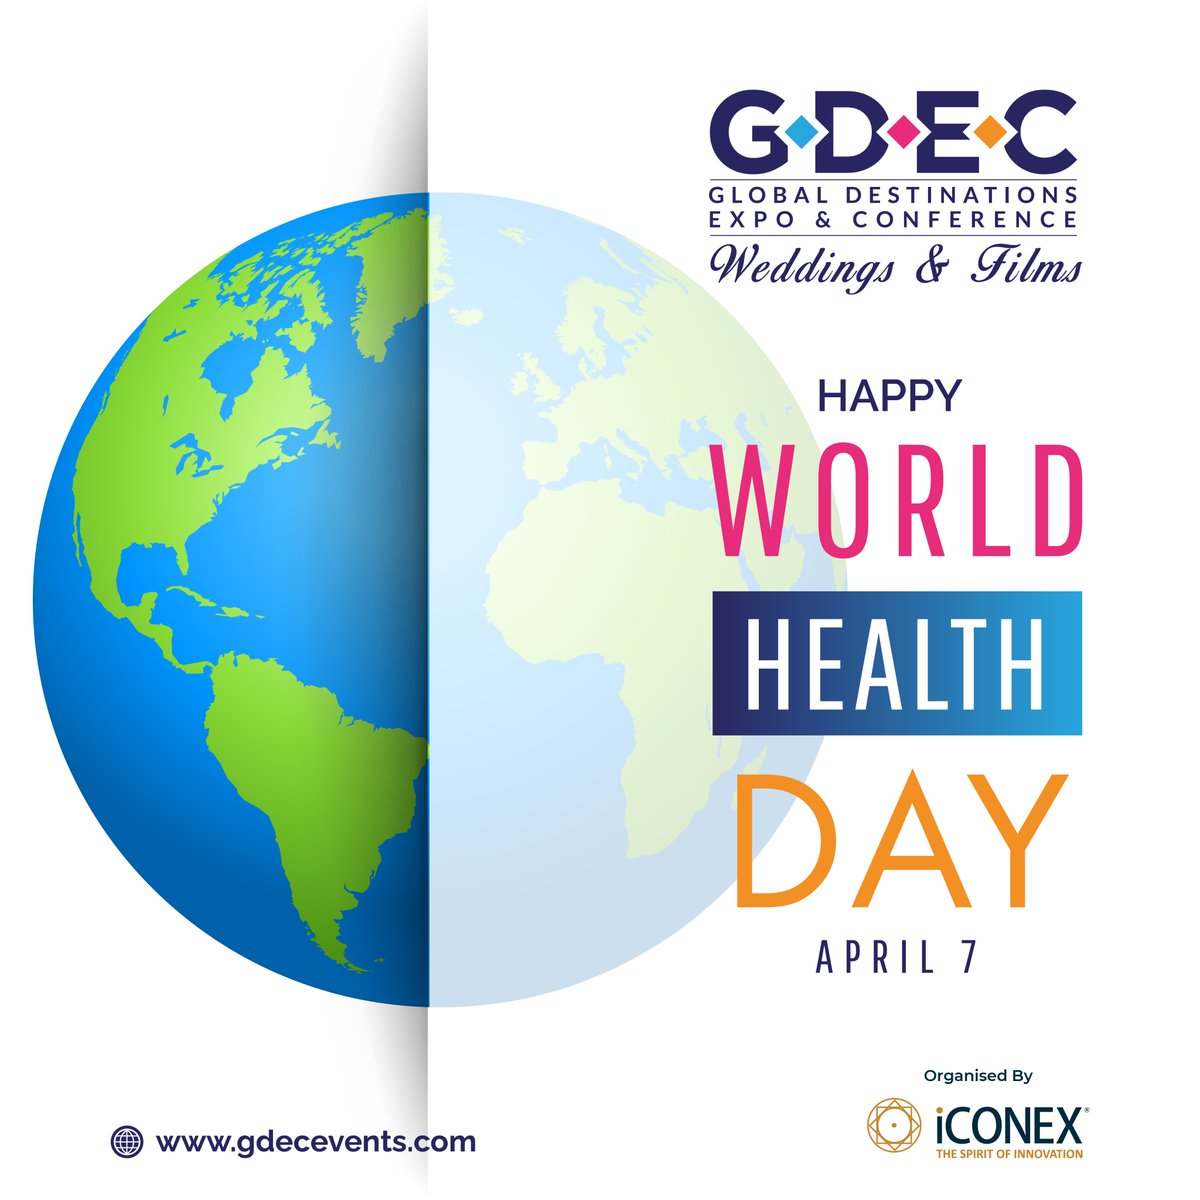 The world is a much better place to live when your health is in place. Wishing you a very Happy World Health Day.

#HappyWorldHealthDay #WorldHealthDay2023 #gdec2023 #weddingdestination #events #conference2023 #expo #wedding #films